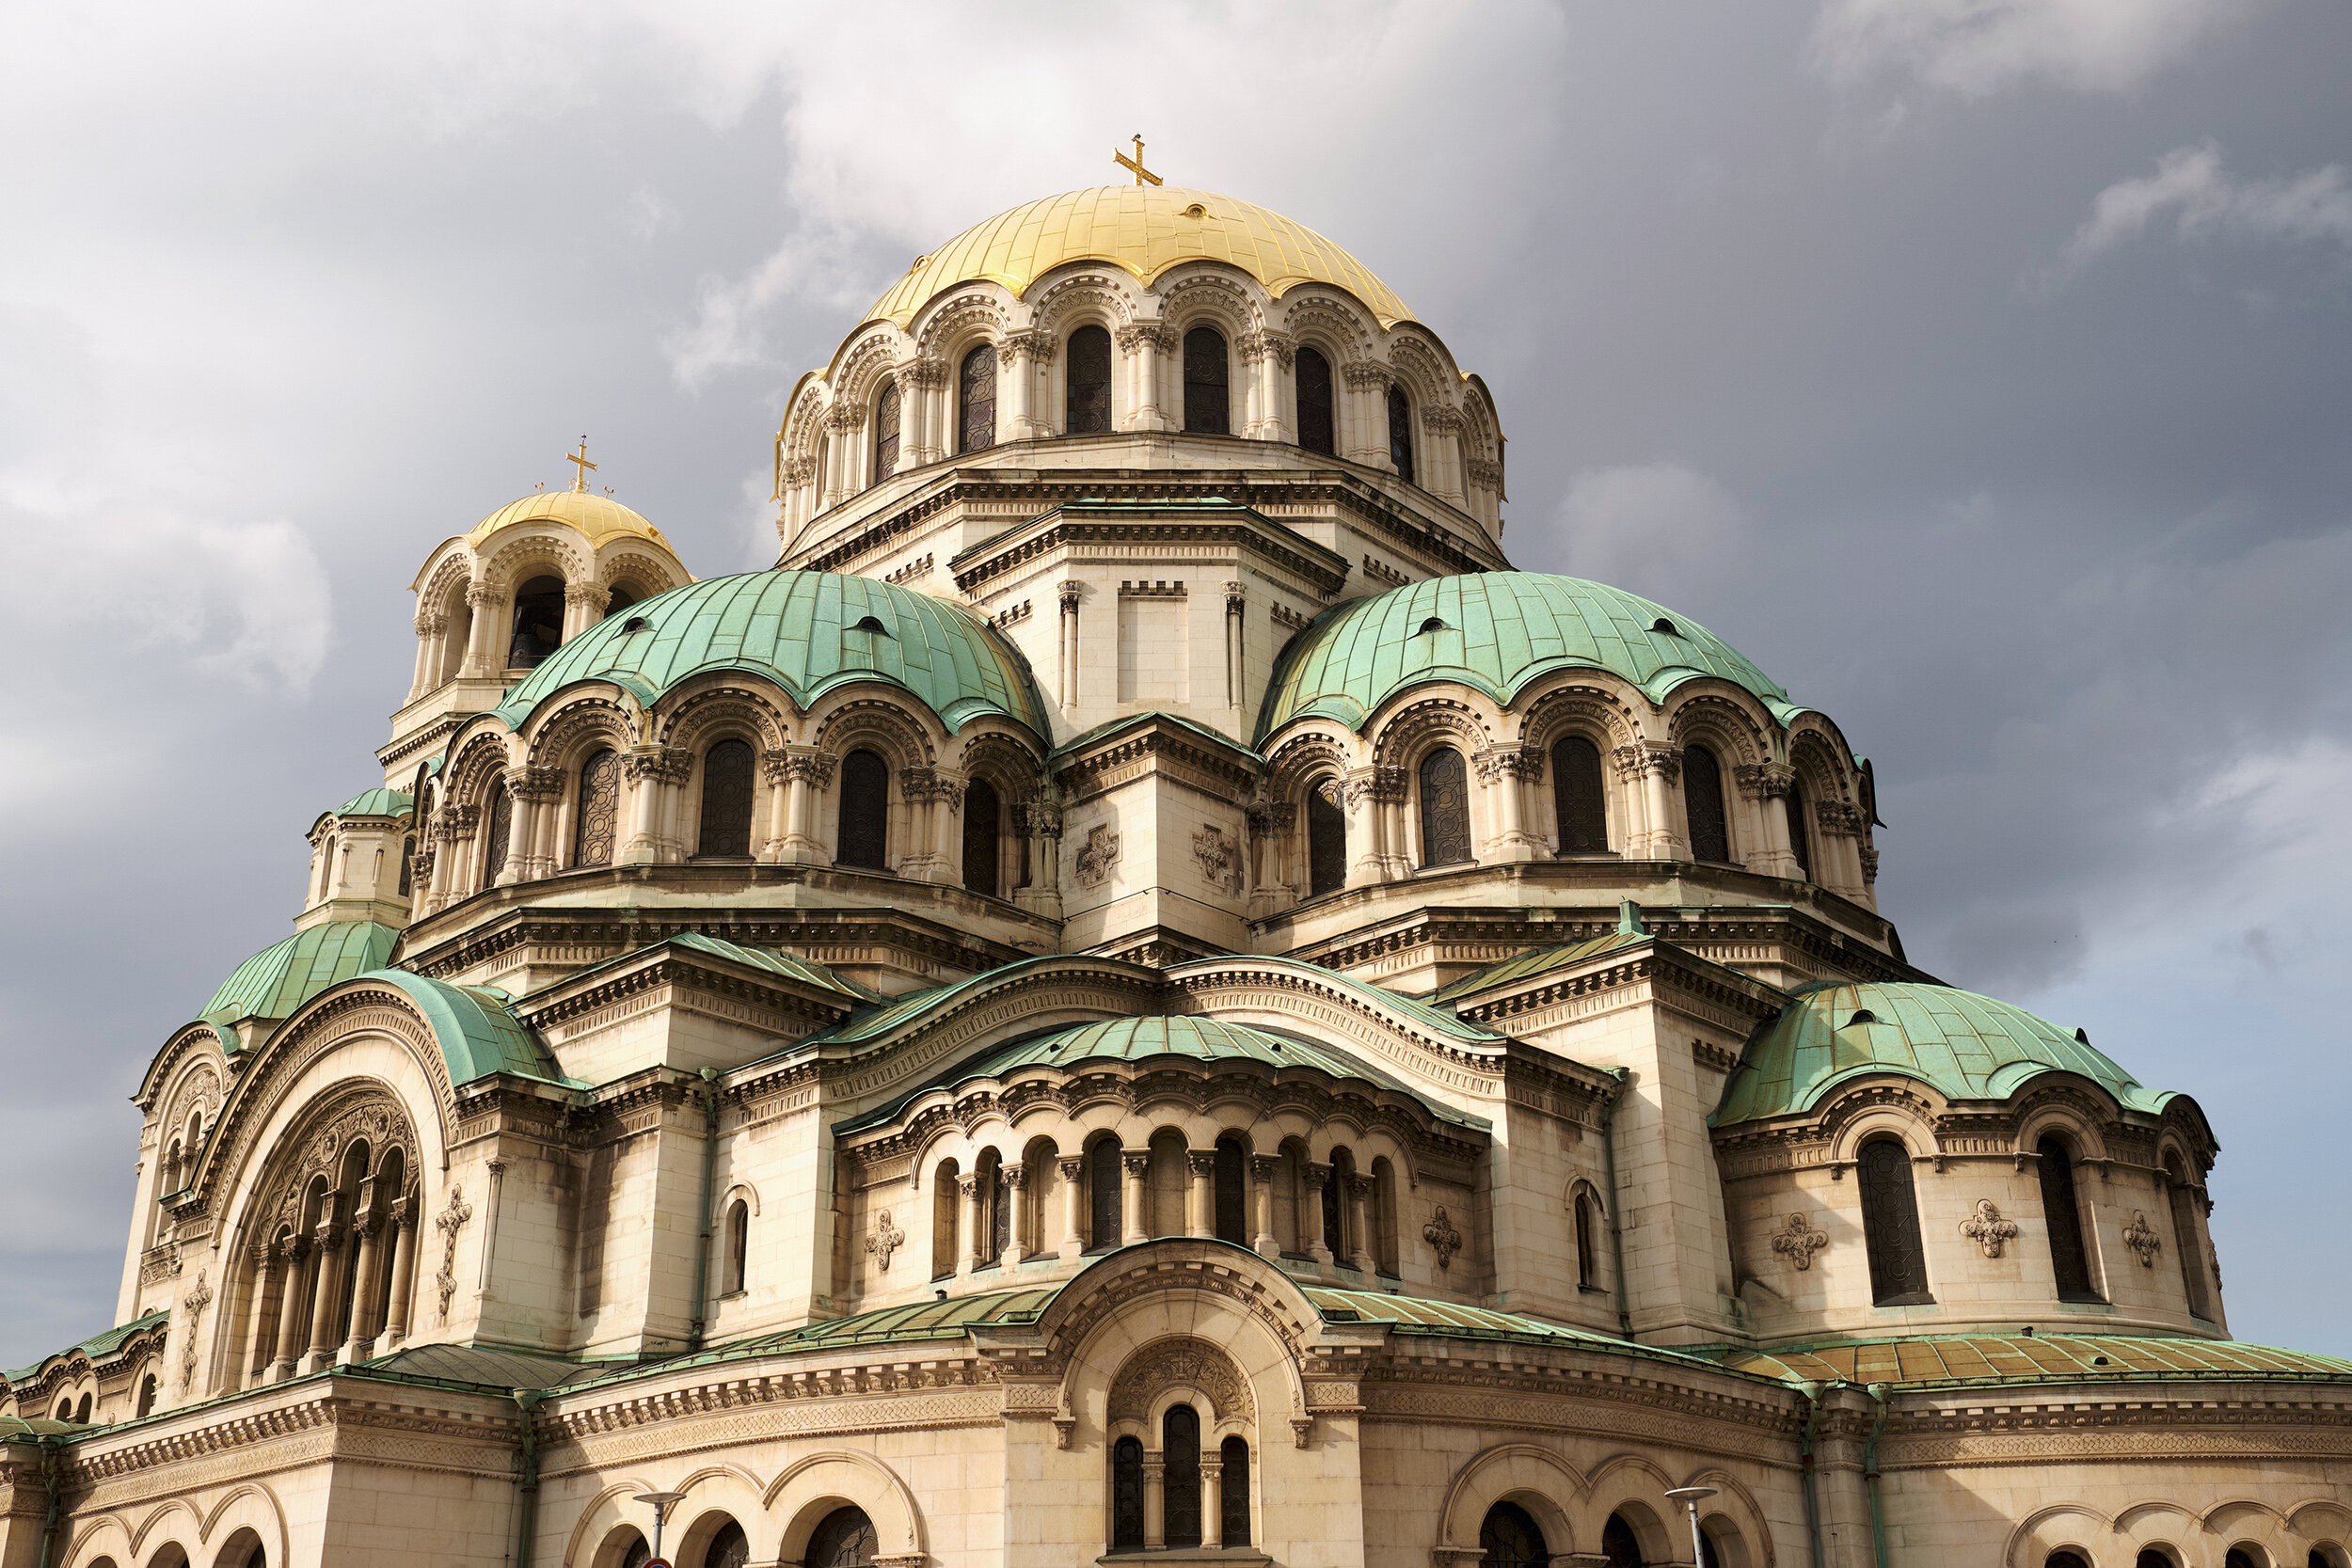 Sofia exploration, 50/50 travelog, Two-day itinerary, City highlights, 2500x1670 HD Desktop